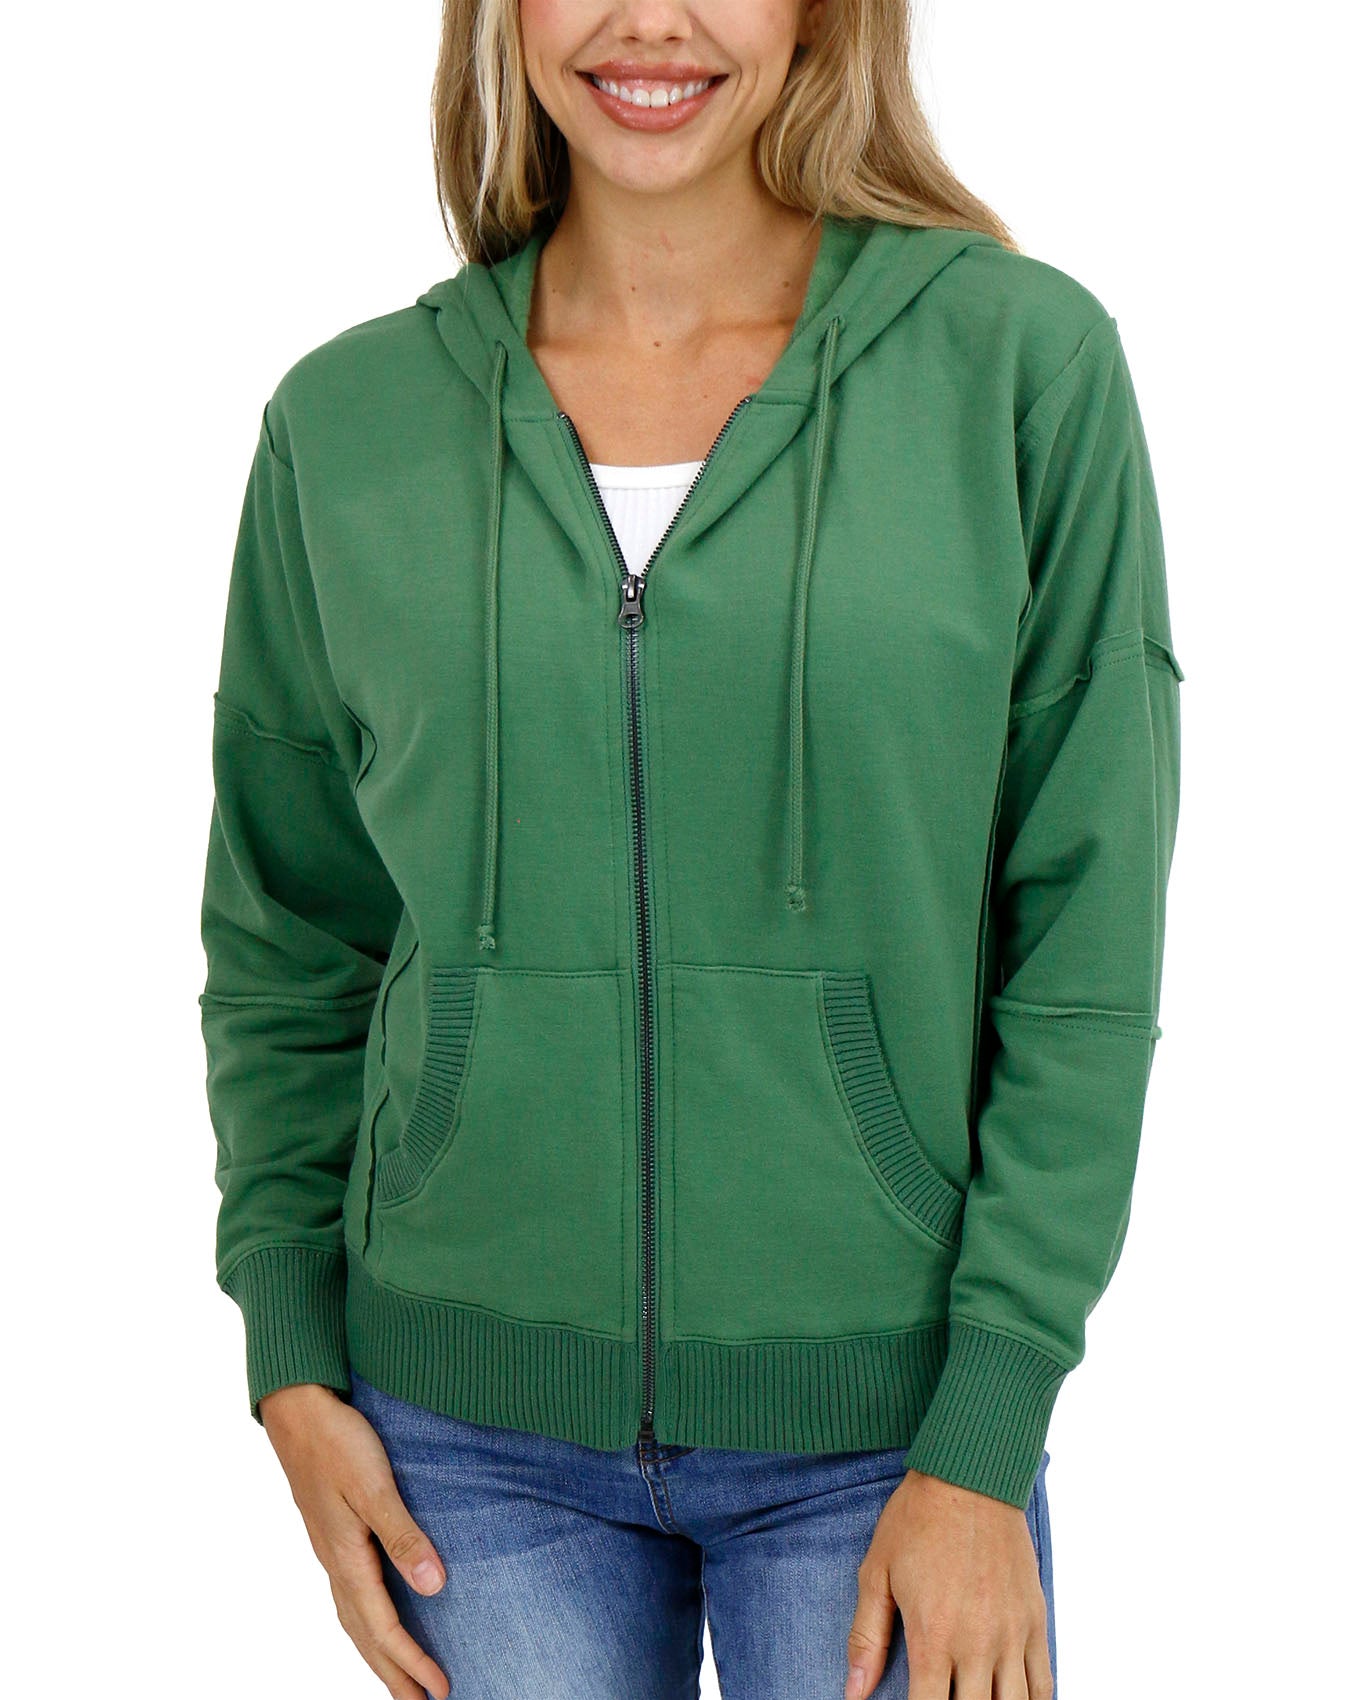 Signature Soft Hedge Green Zip Up Hoodie - FINAL SALE - Grace and Lace